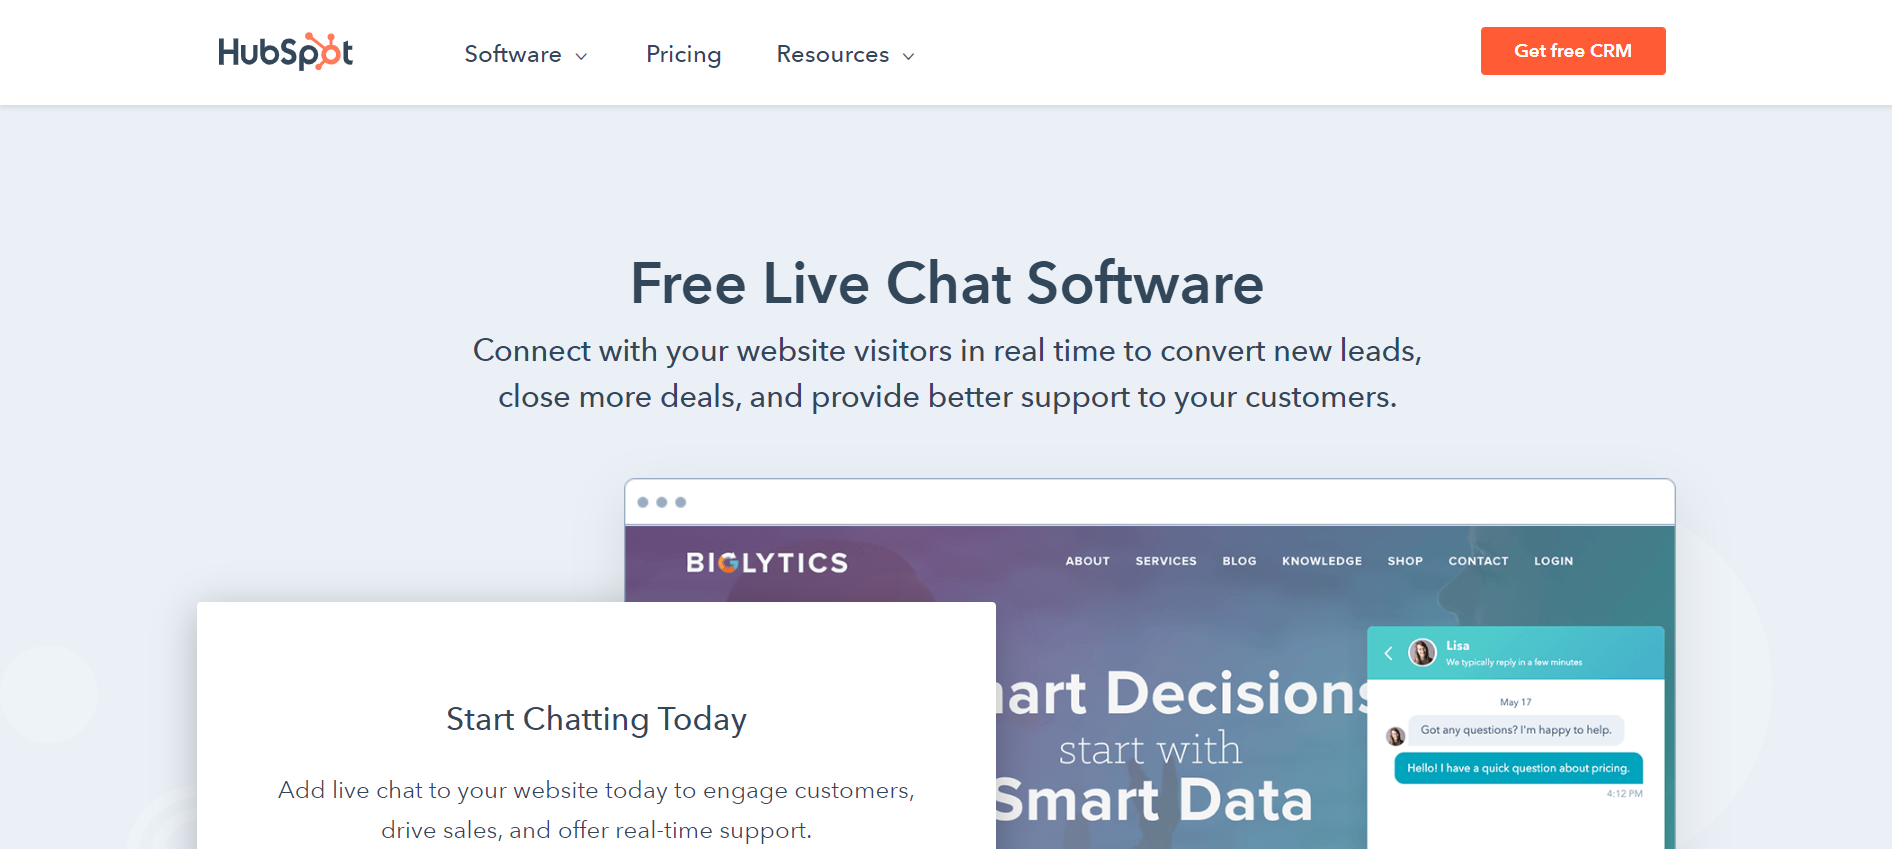 Free live chat software